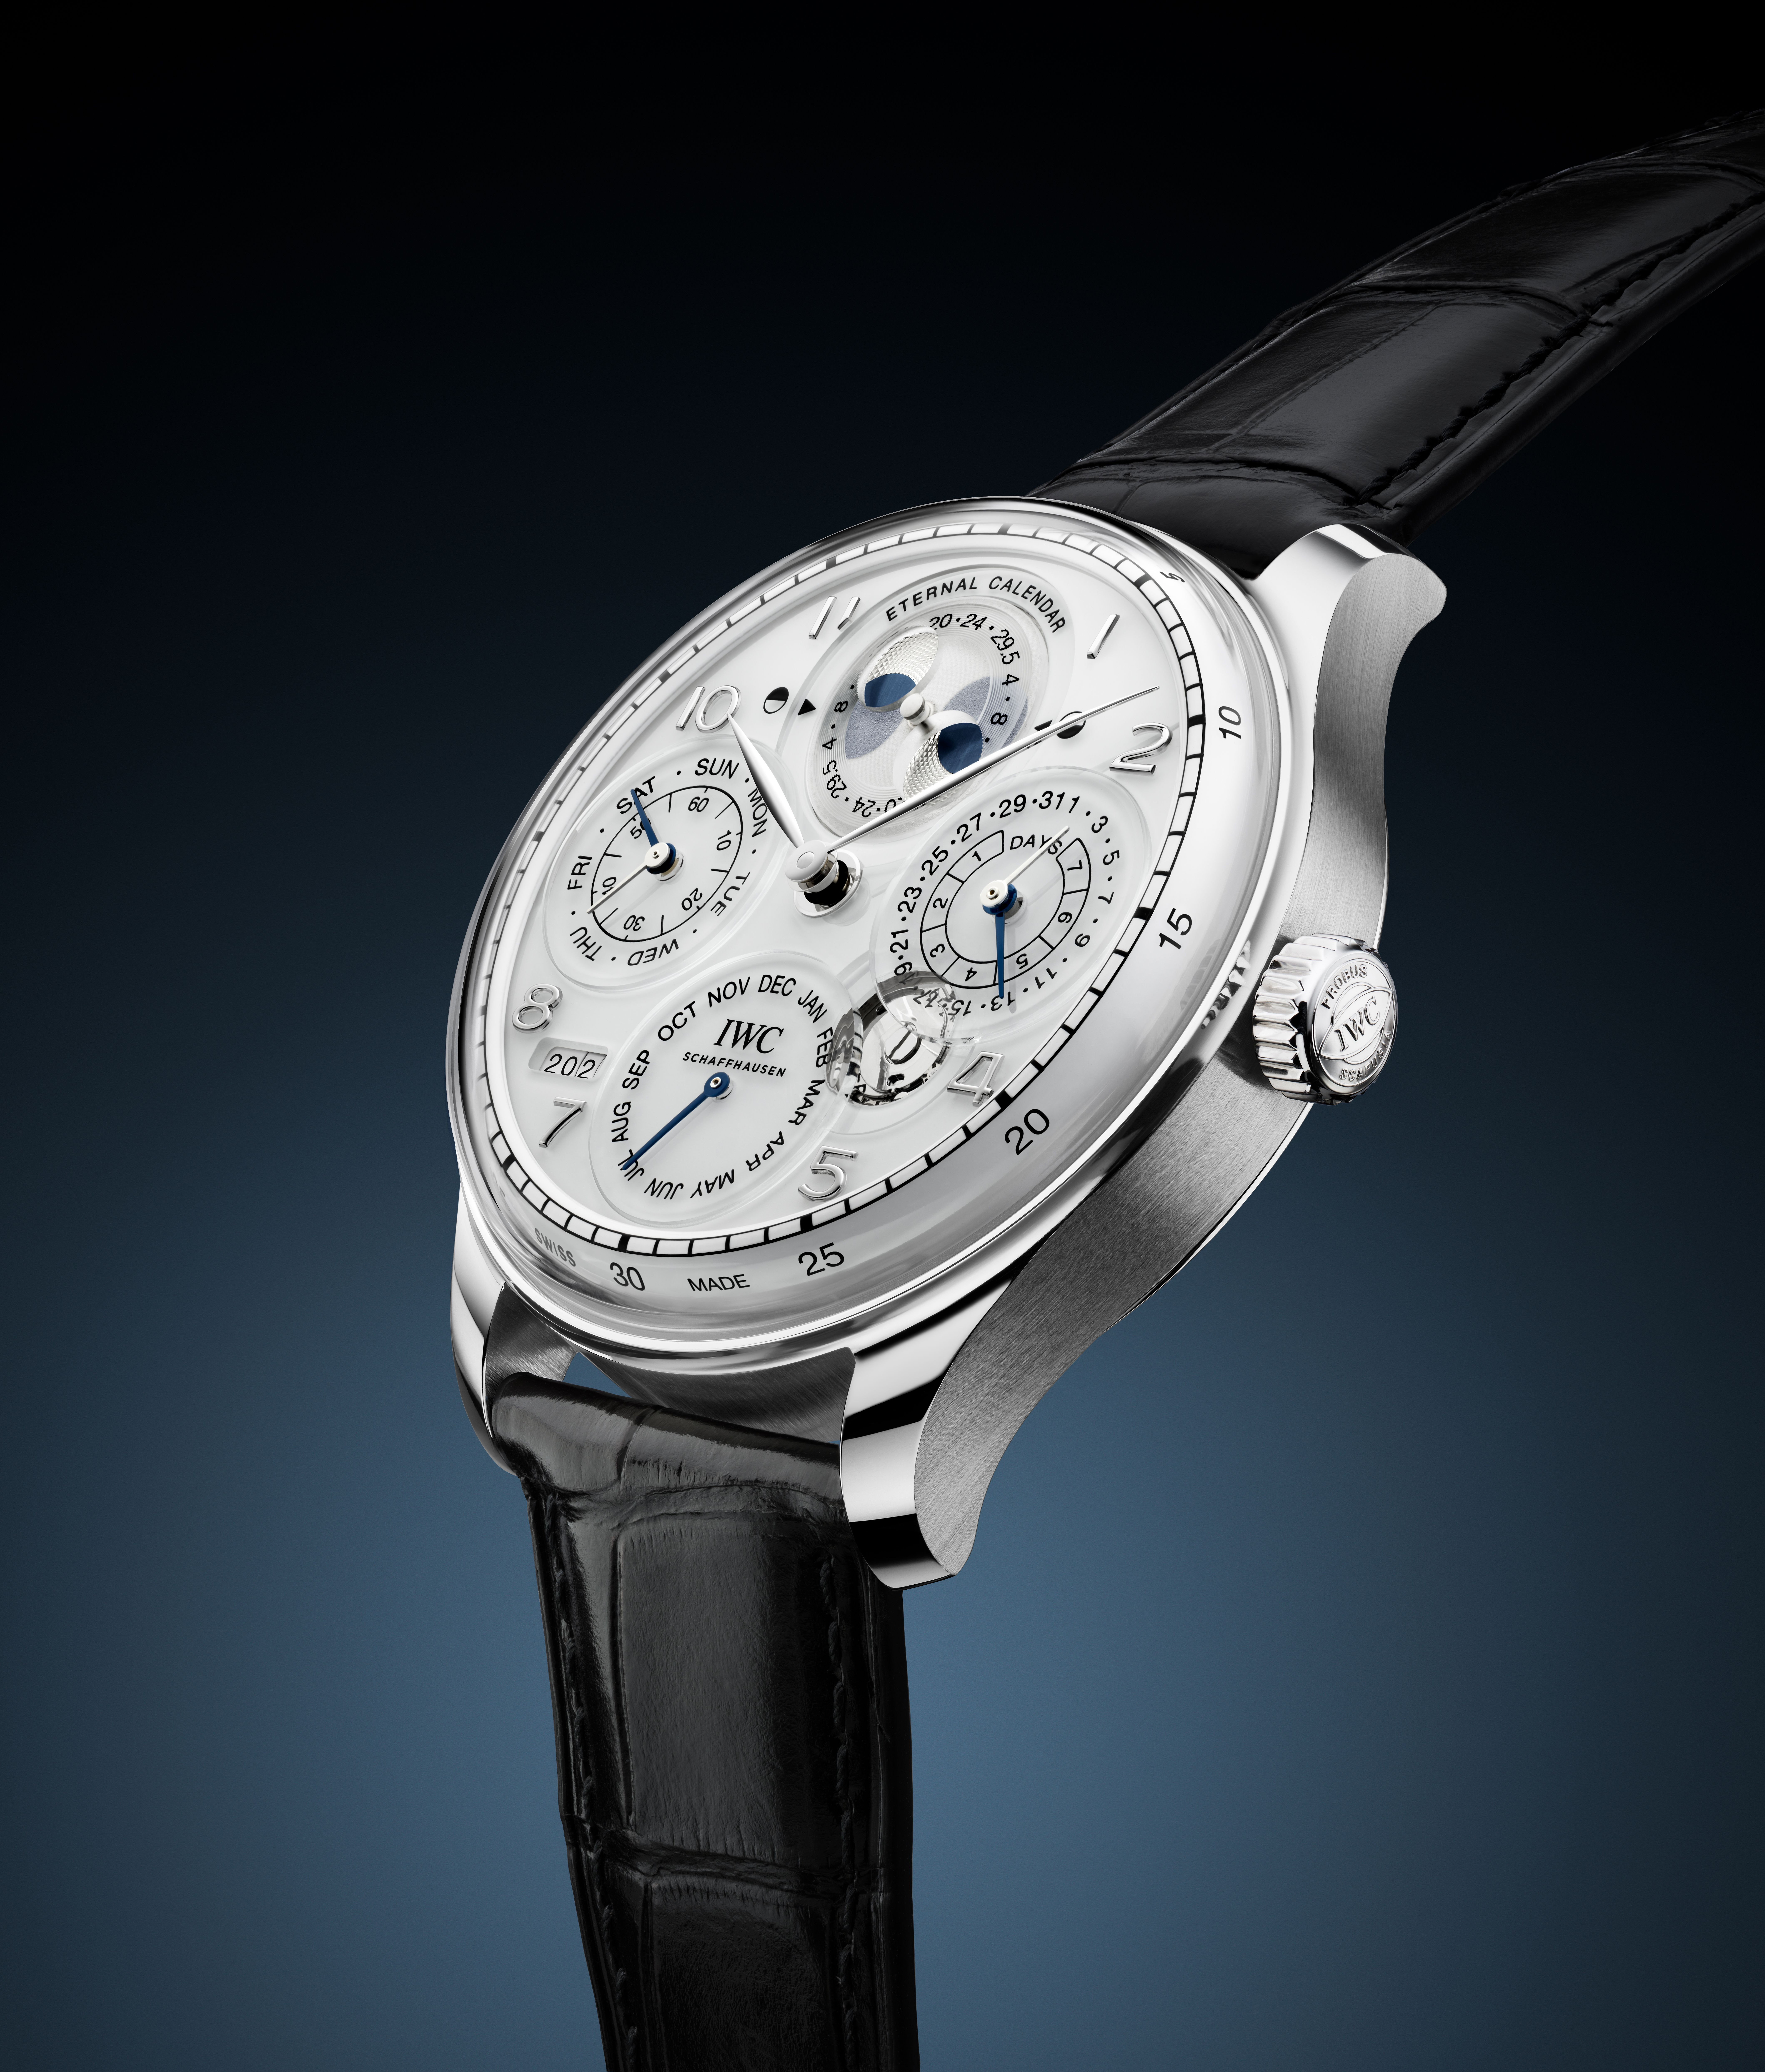 IWC Portugieser Eternal Calendar case is crafted out of platinum